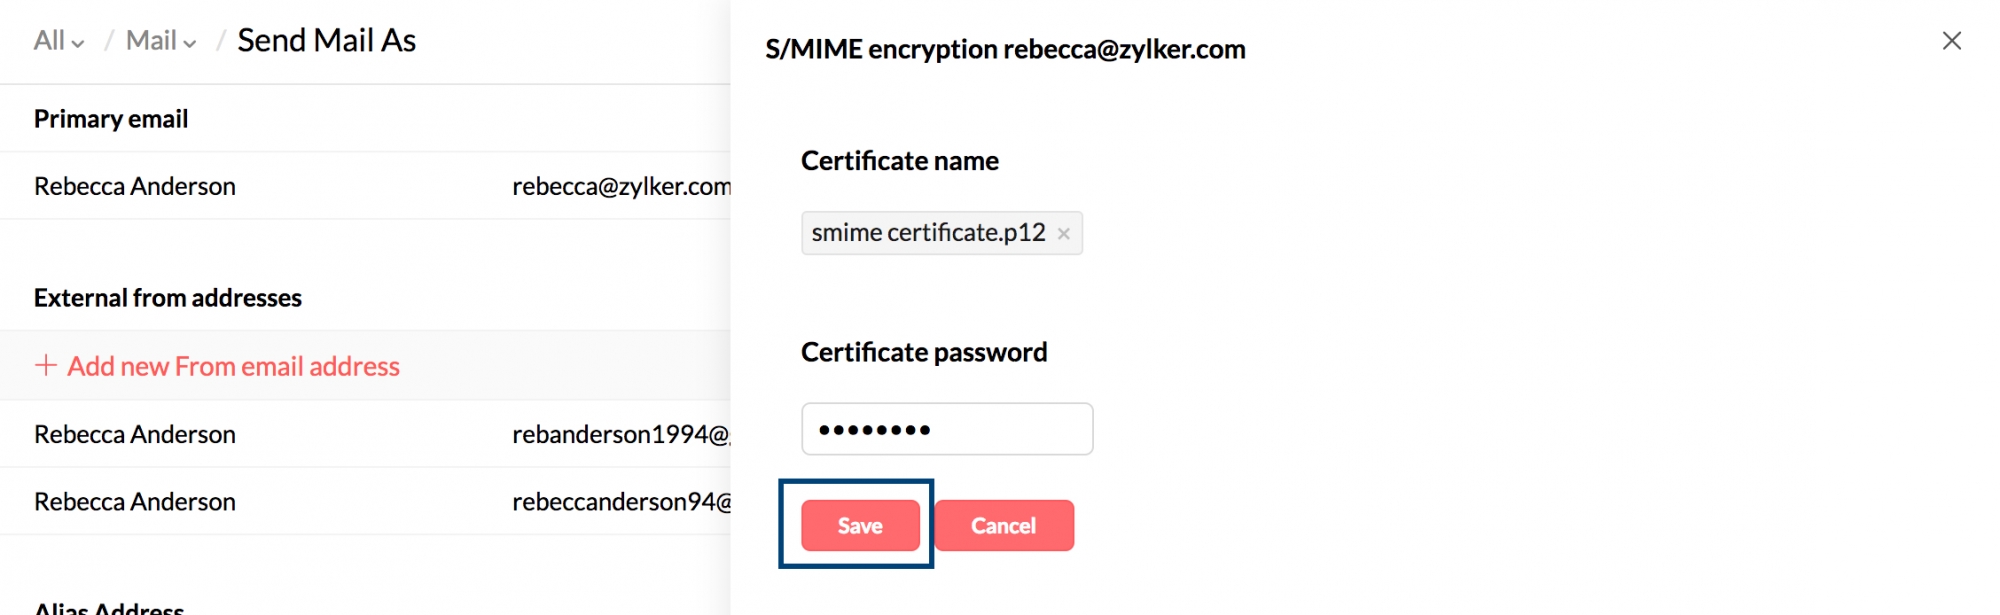 upload S/MIME certificate